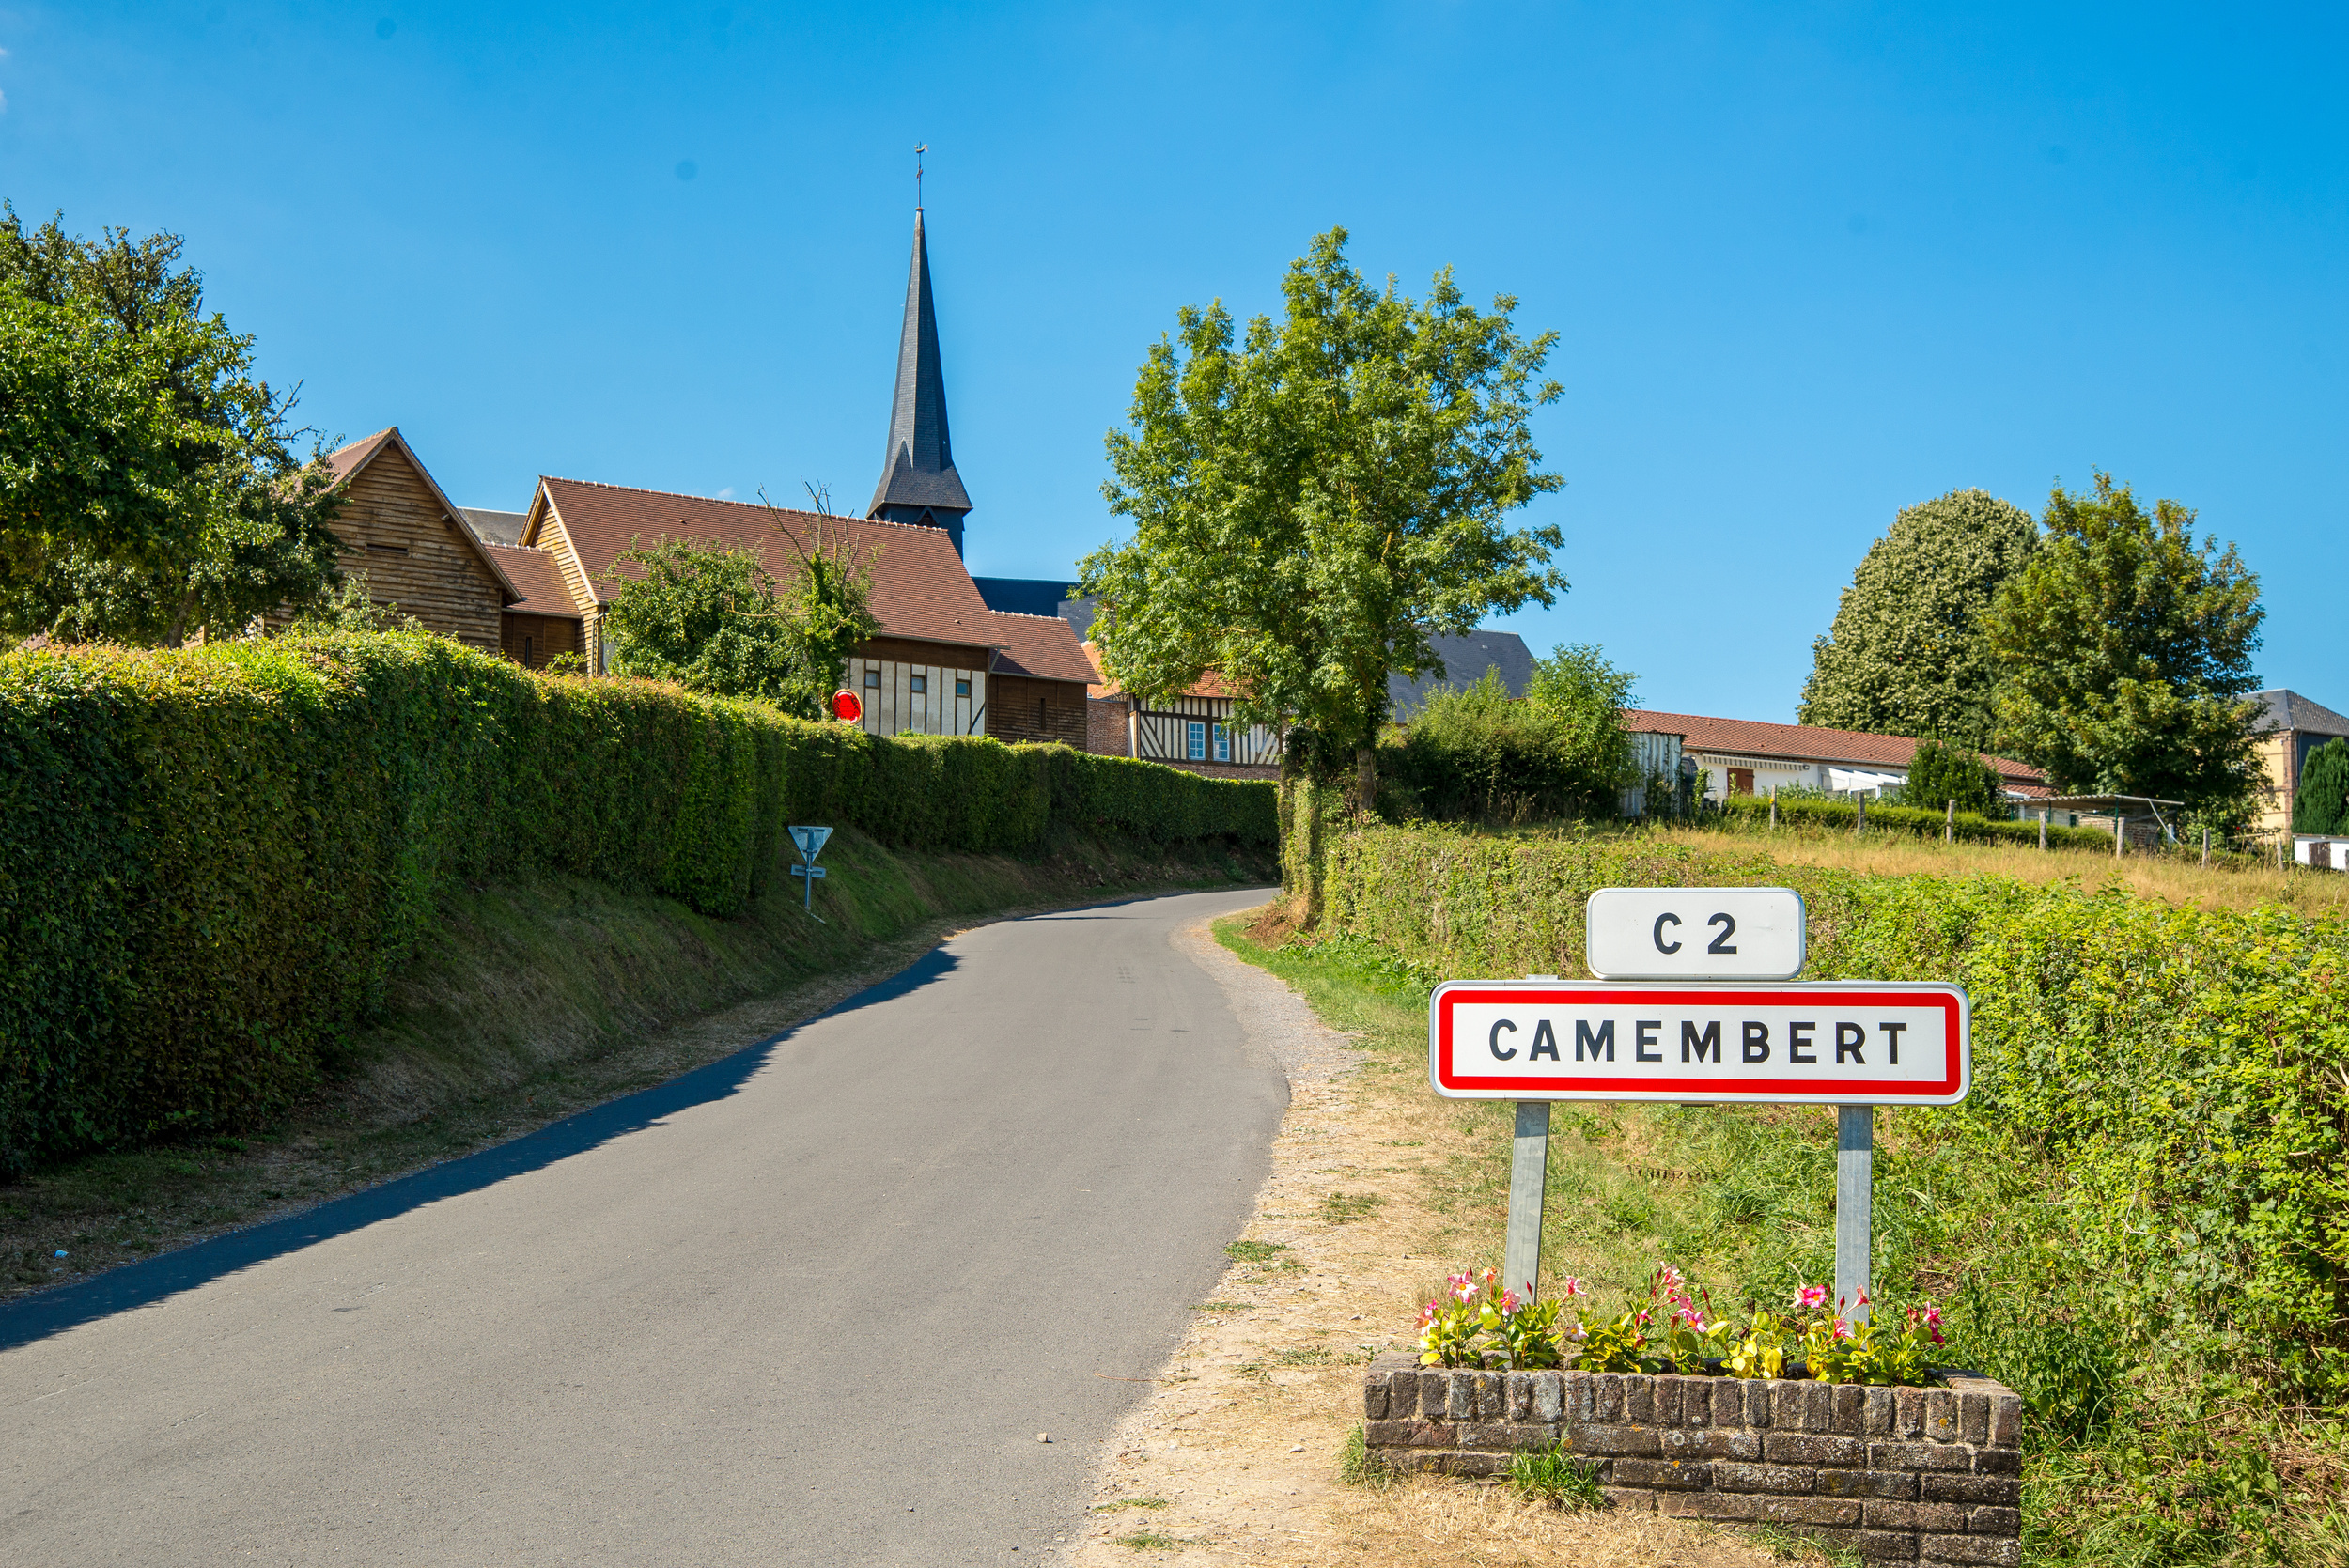 <p>One of France’s most famous stinky cheeses shares its name with the village where it was created. Camembert is in northwestern France, just a few hours from Paris.</p><p>You may also like: <a href='https://www.yardbarker.com/lifestyle/articles/too_sweet_24_of_the_oldest_candy_bars_still_available_012324/s1__39111177'>Too sweet: 24 of the oldest candy bars still available</a></p>